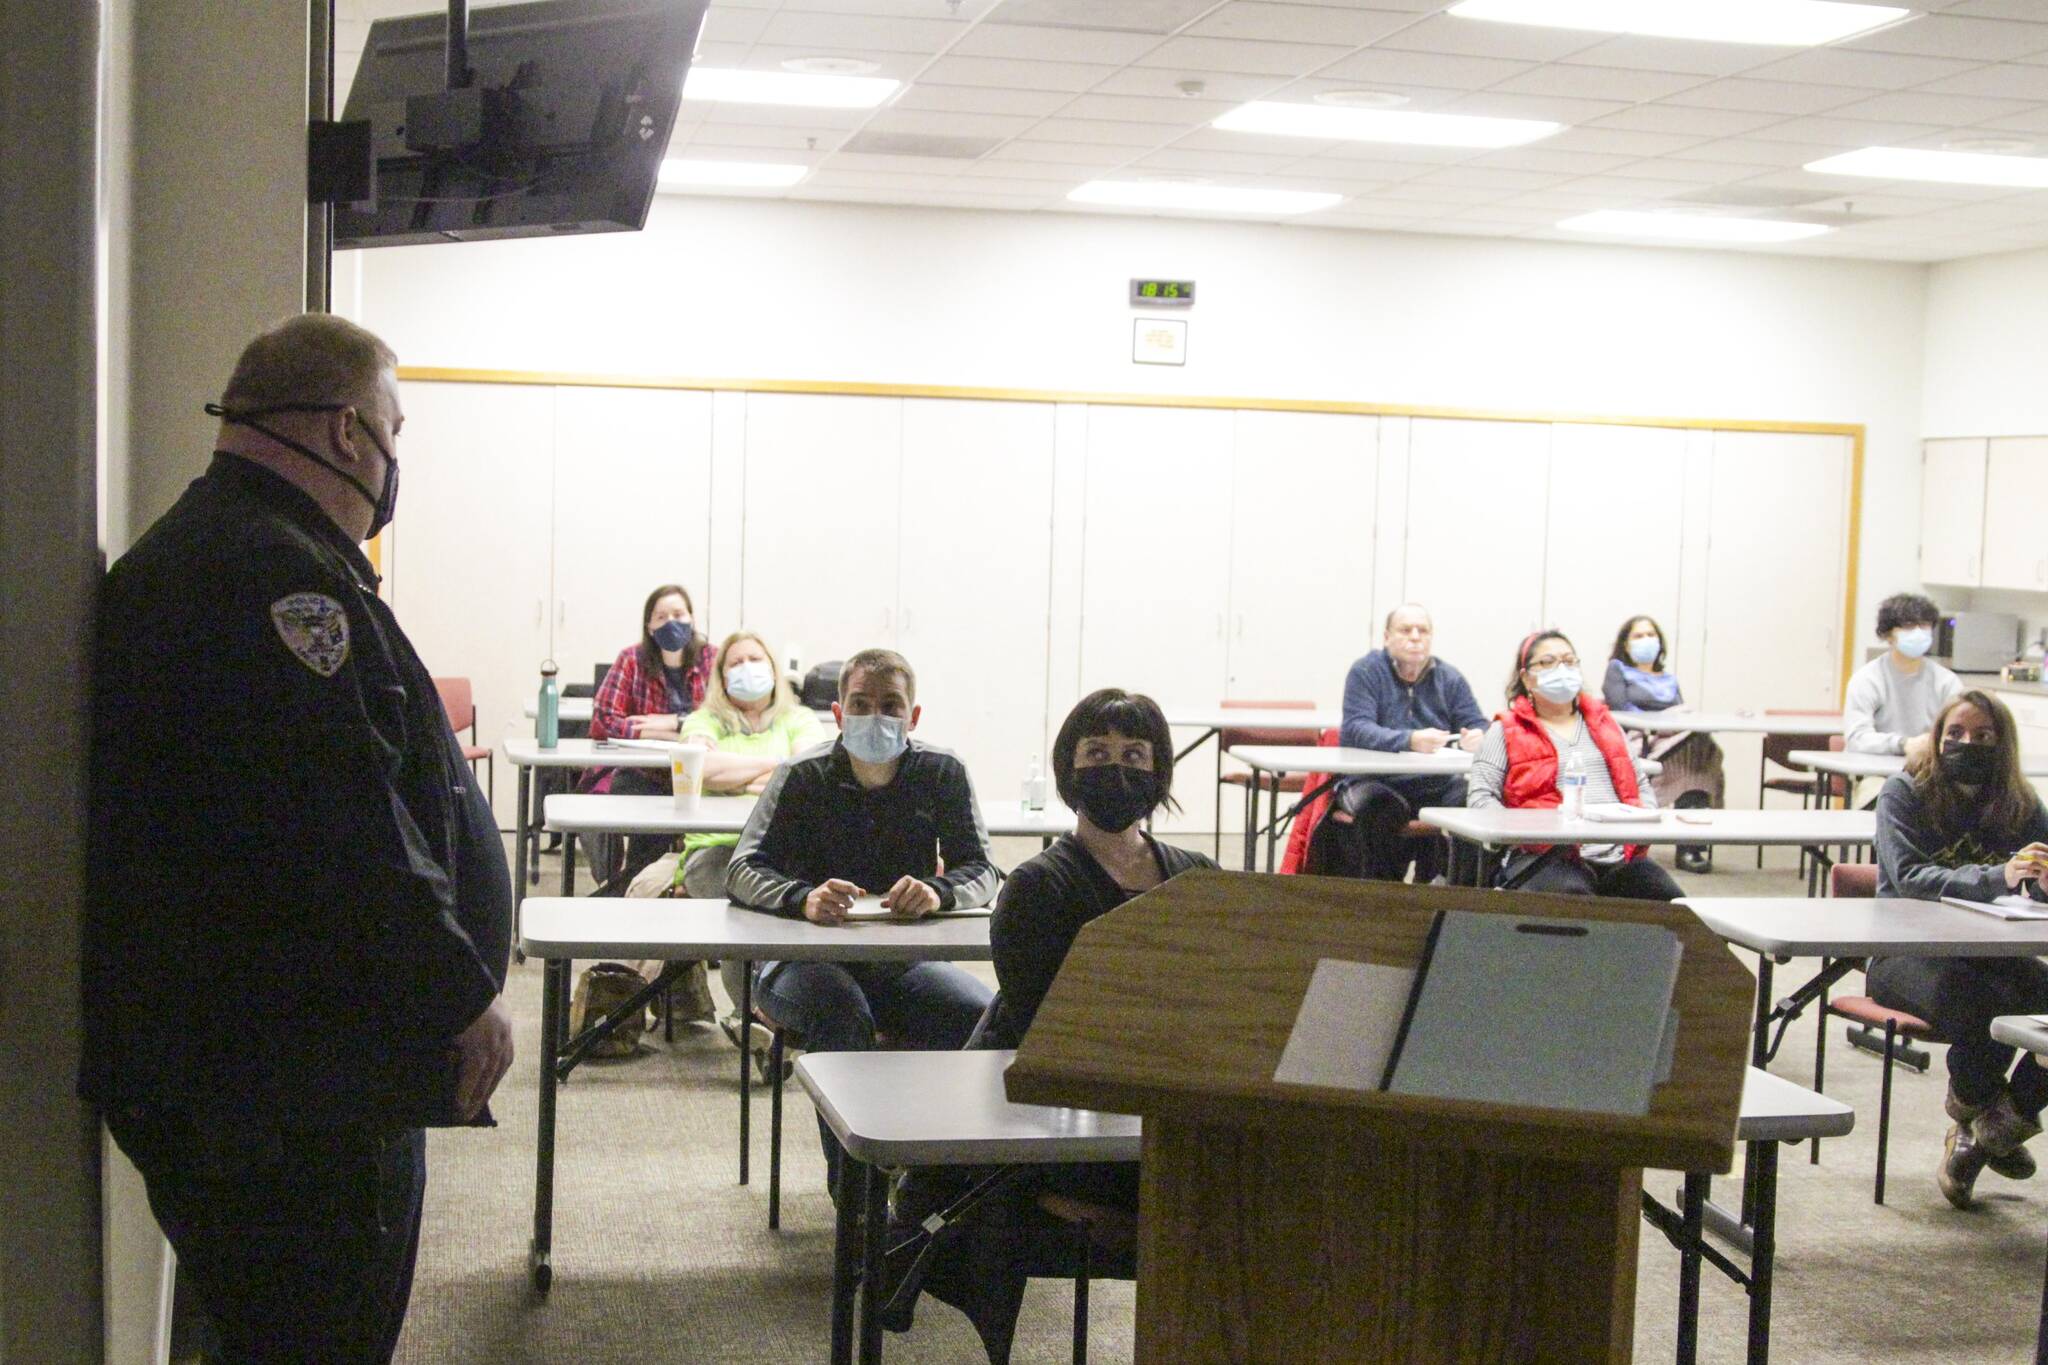 Lt. Scott Erickson answers a question use of force policy as he instructs a group of Juneau residents during the Juneau Police Department’s Citizen’s Academy on Nov. 4, 2021. (Michael S. Lockett / Juneau Empire)